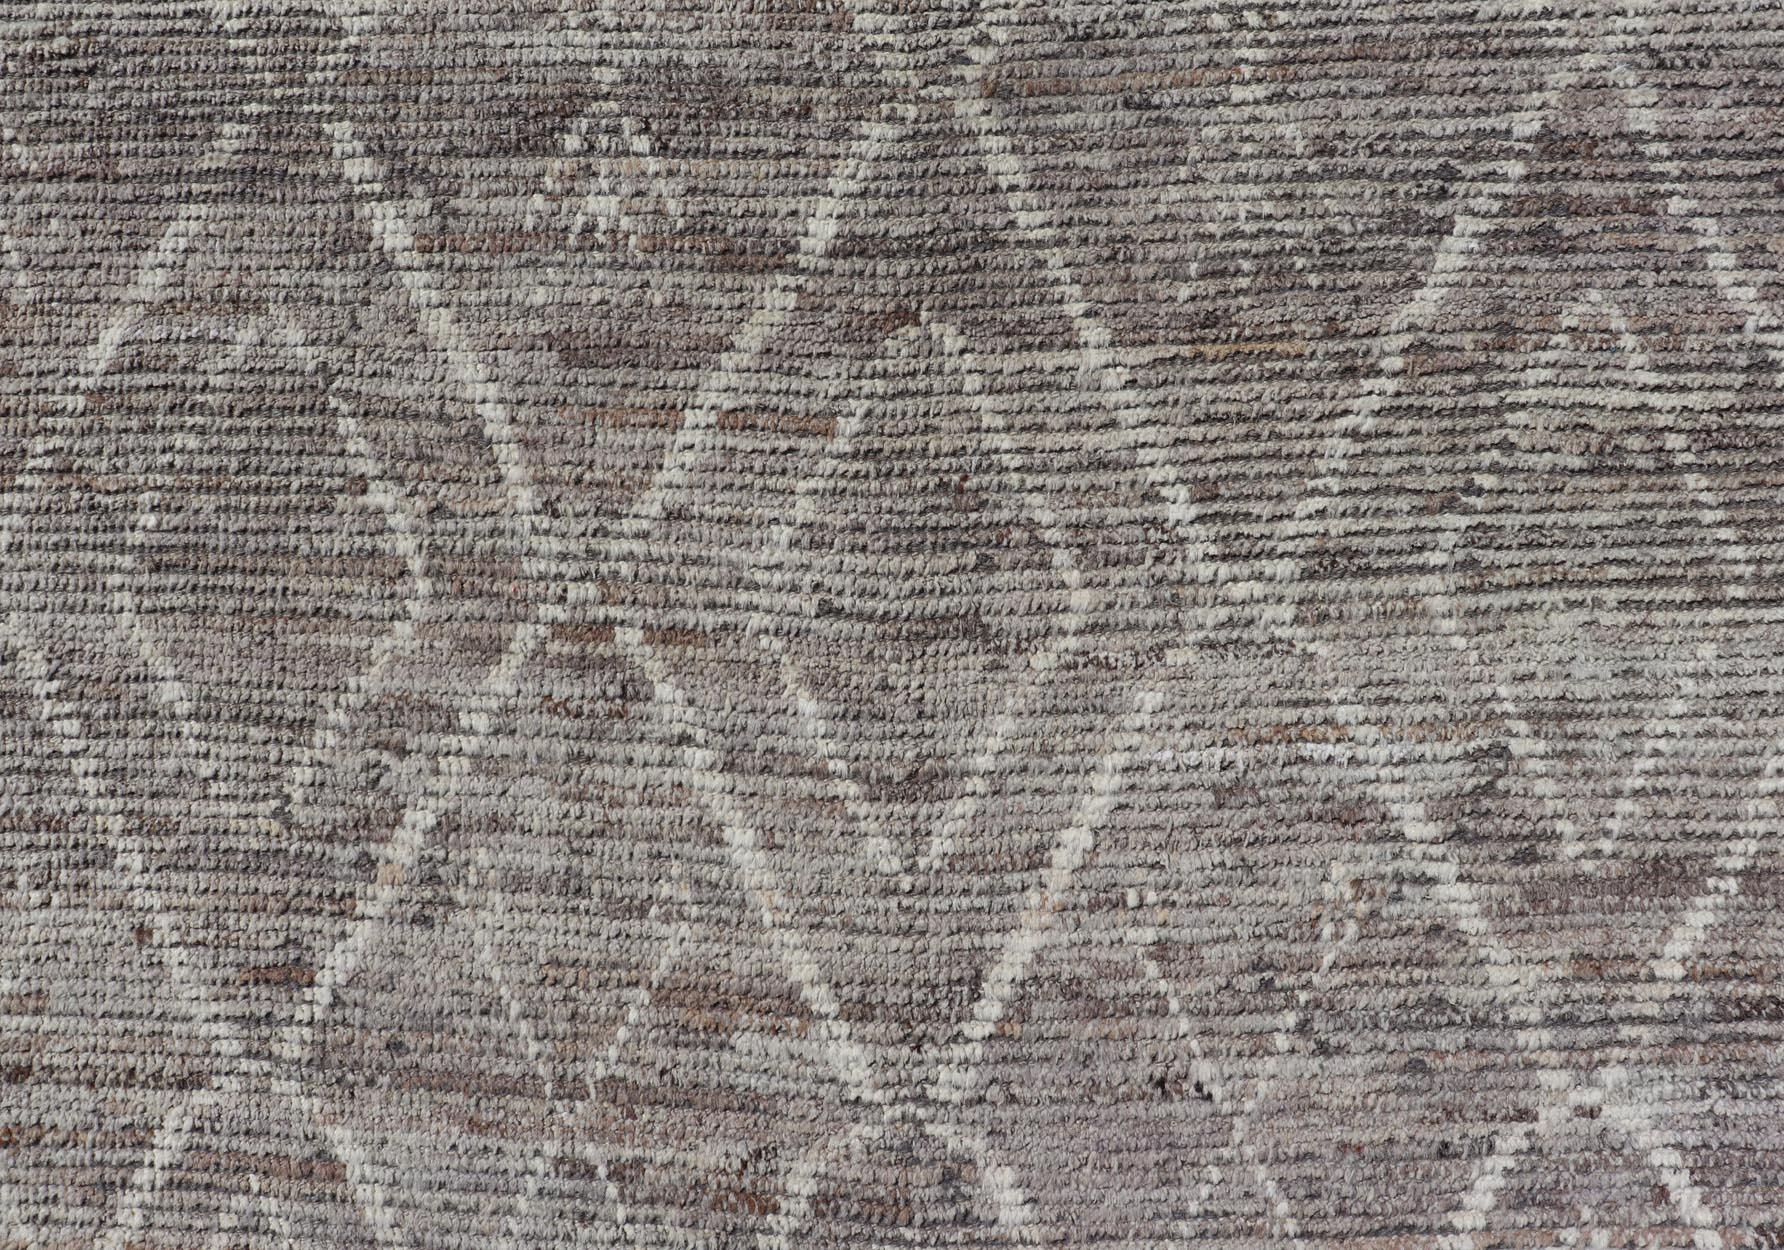 This modern casual rug has been hand-knotted. The rug features a geometric Moroccan diamond design, replete with various motifs gray and cream; making this rug a superb fit for a variety of classic, modern, casual and minimalist interiors.

Modern